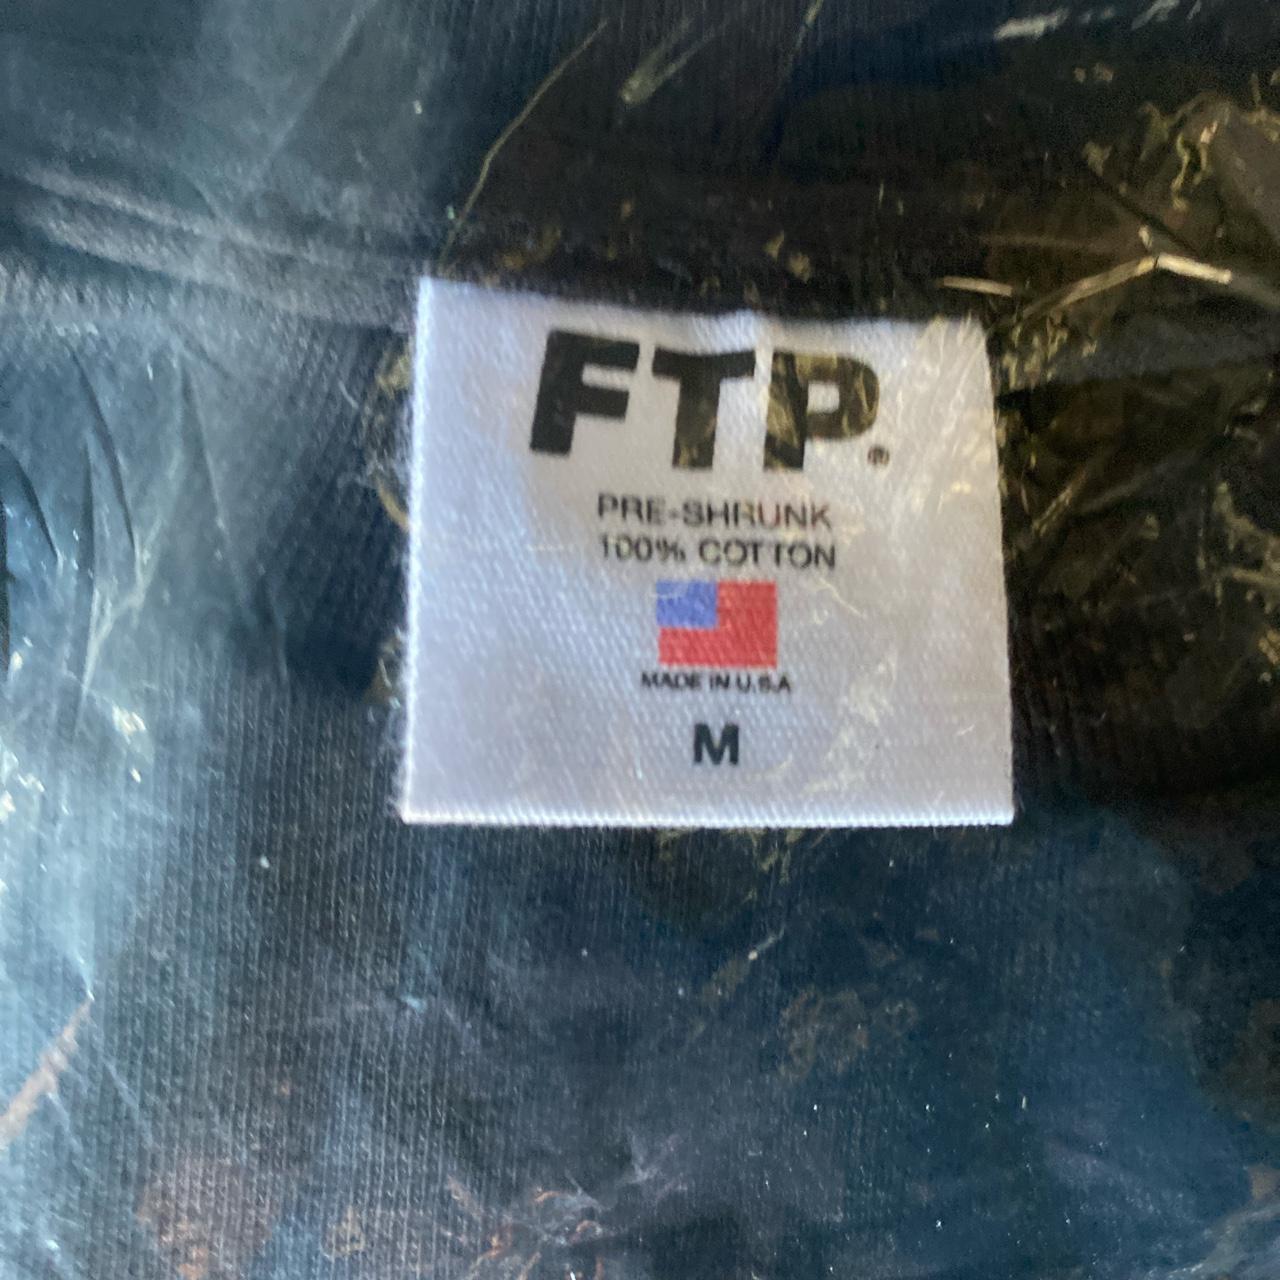 Product Image 3 - #FTP #FUCKTHEPOPULATION

SCRIBBLE LOGO TEE. Size